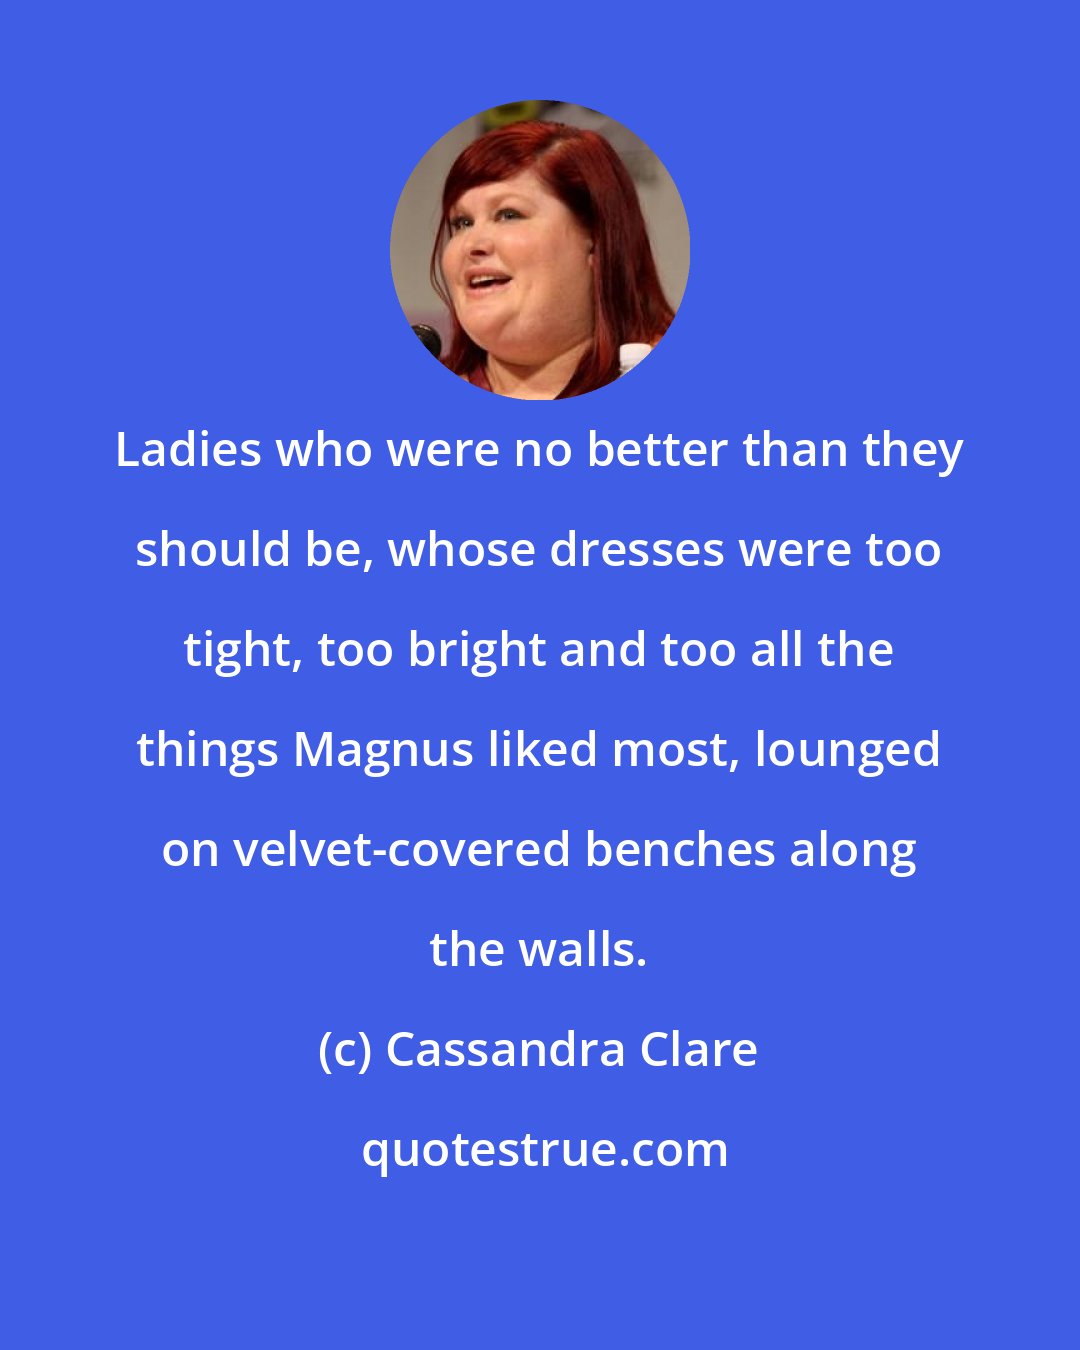 Cassandra Clare: Ladies who were no better than they should be, whose dresses were too tight, too bright and too all the things Magnus liked most, lounged on velvet-covered benches along the walls.